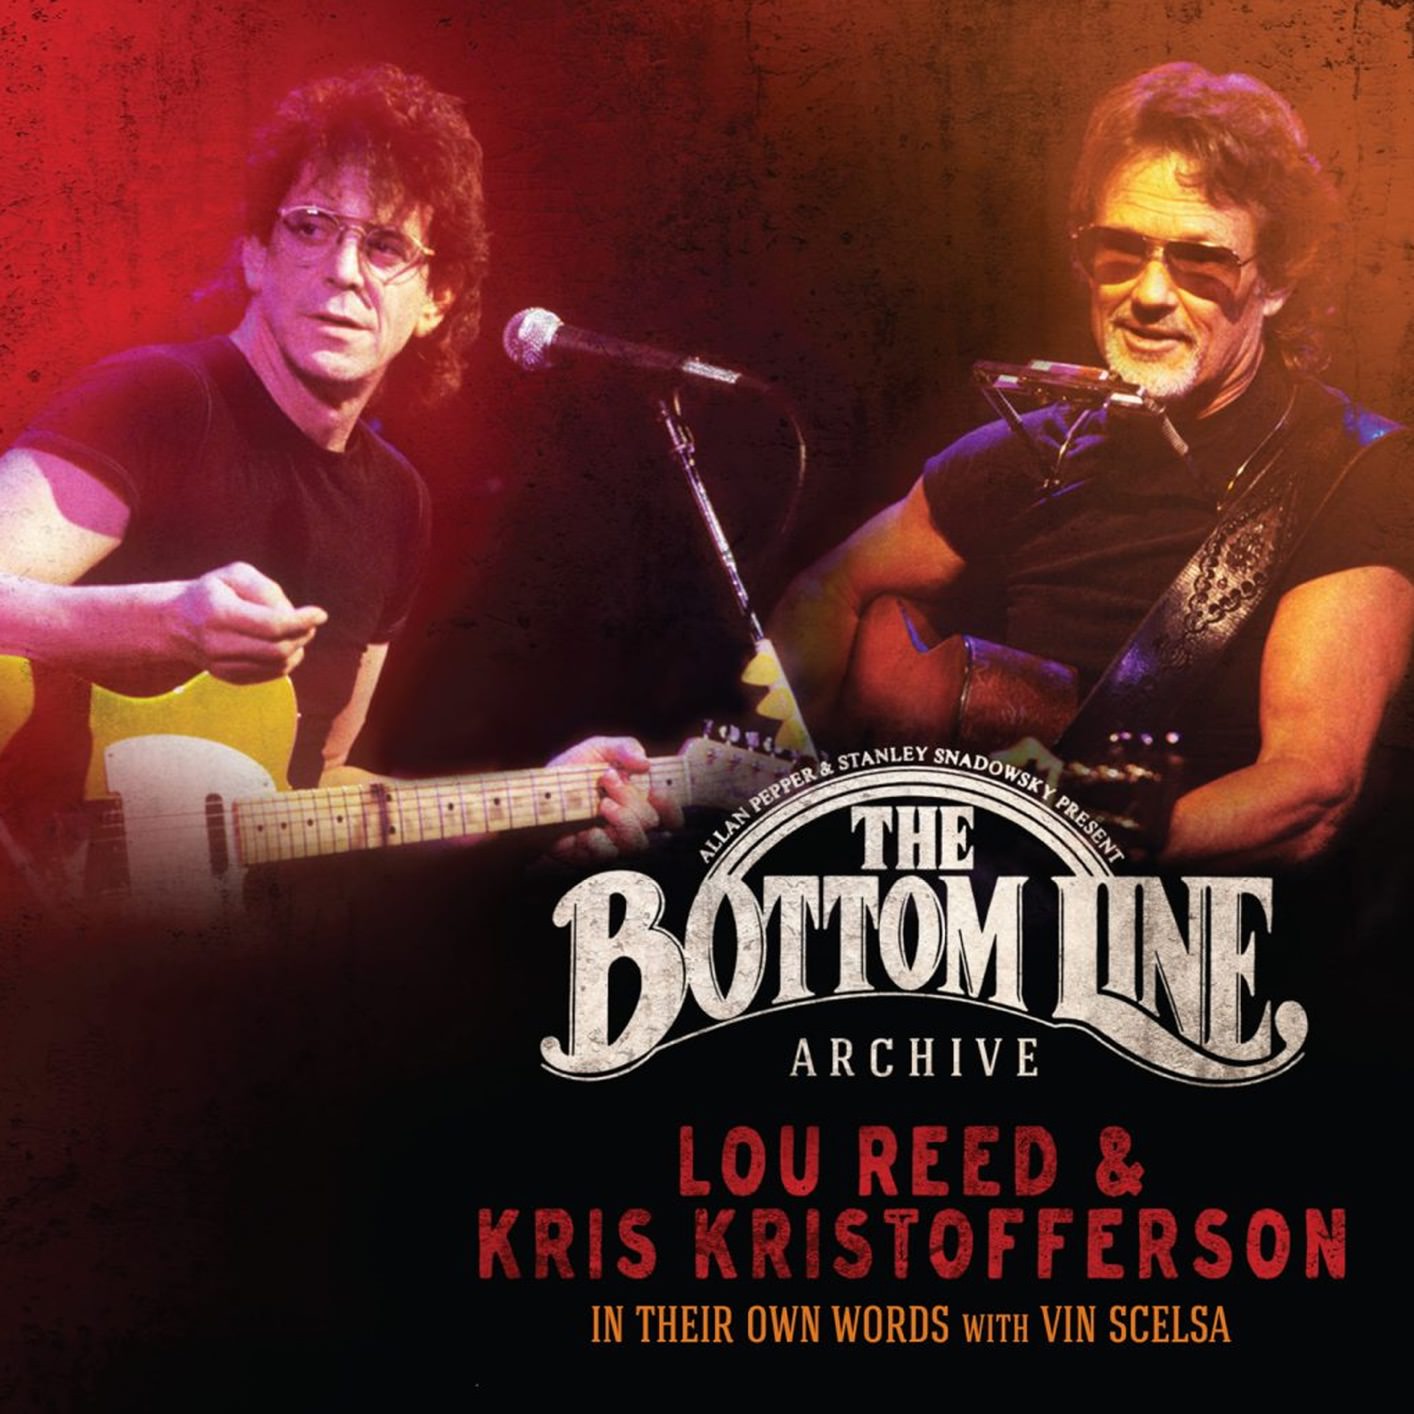 Lou Reed & Kris Kristofferson – The Bottom Line Archive Series: In Their Own Words With Vin Scelsa (2017/2018) [FLAC 24bit/44,1kHz]